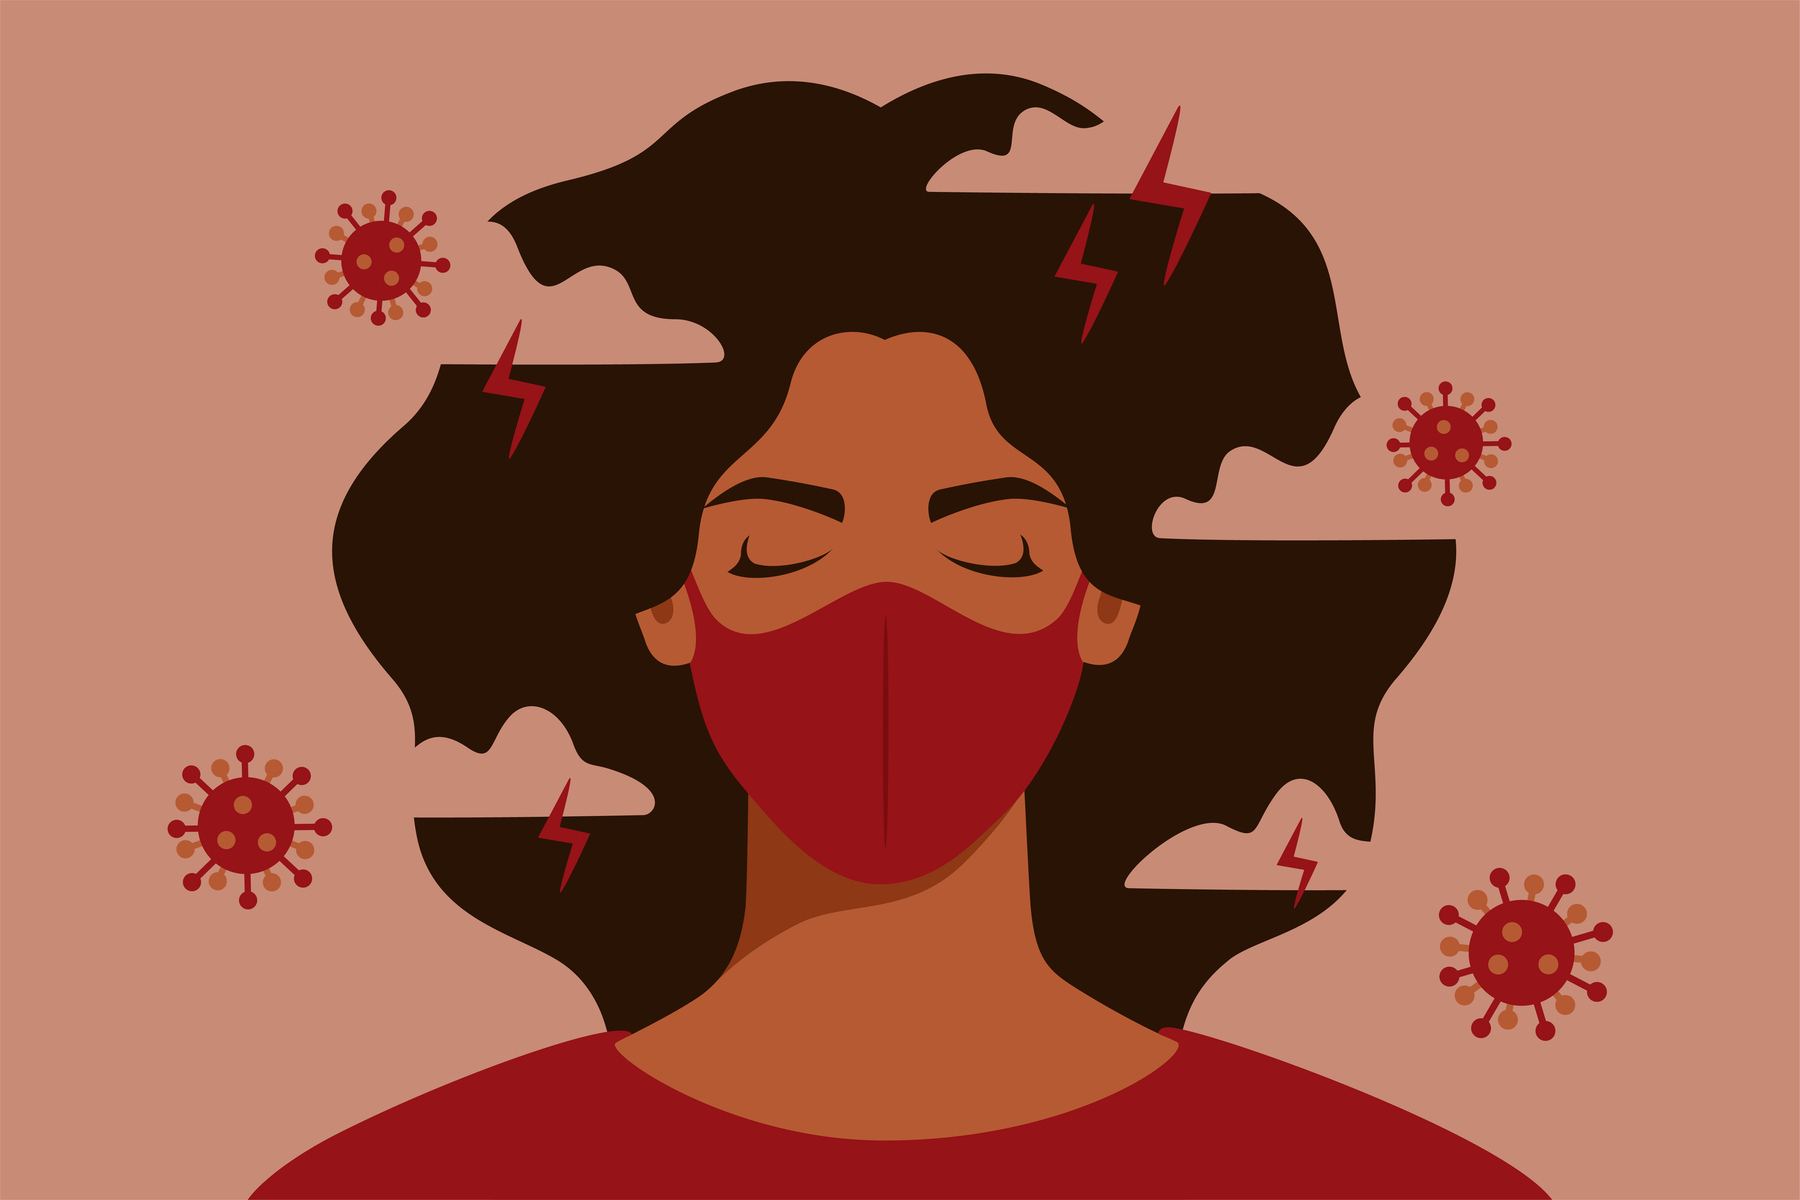 Illustration of a person with dark brown hair wearing a red face mask, surrounded by stylized coronavirus icons and red lightning bolts.